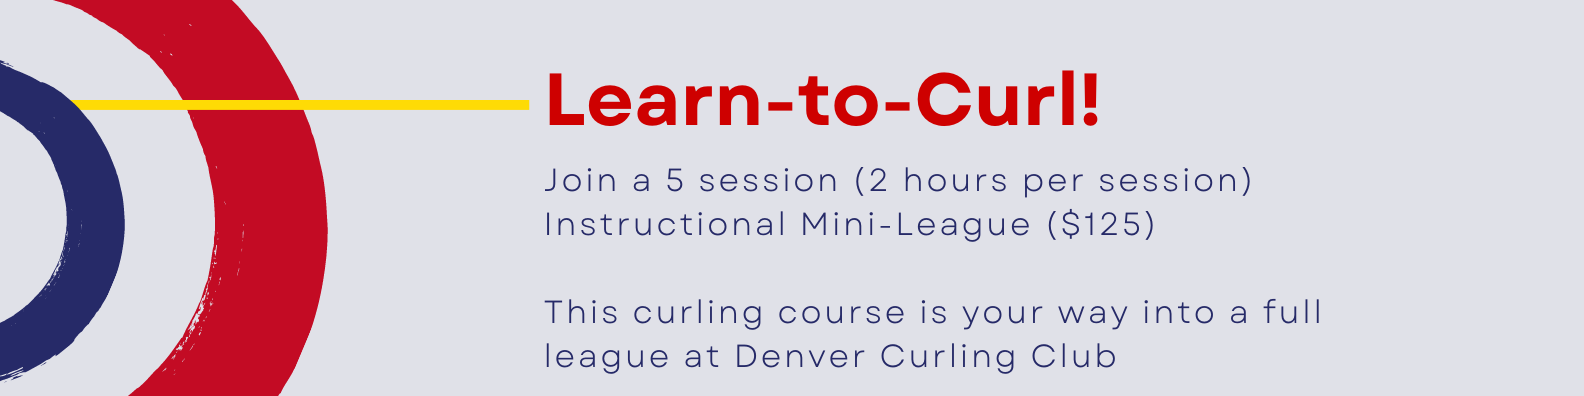 DCC Learn to Curl